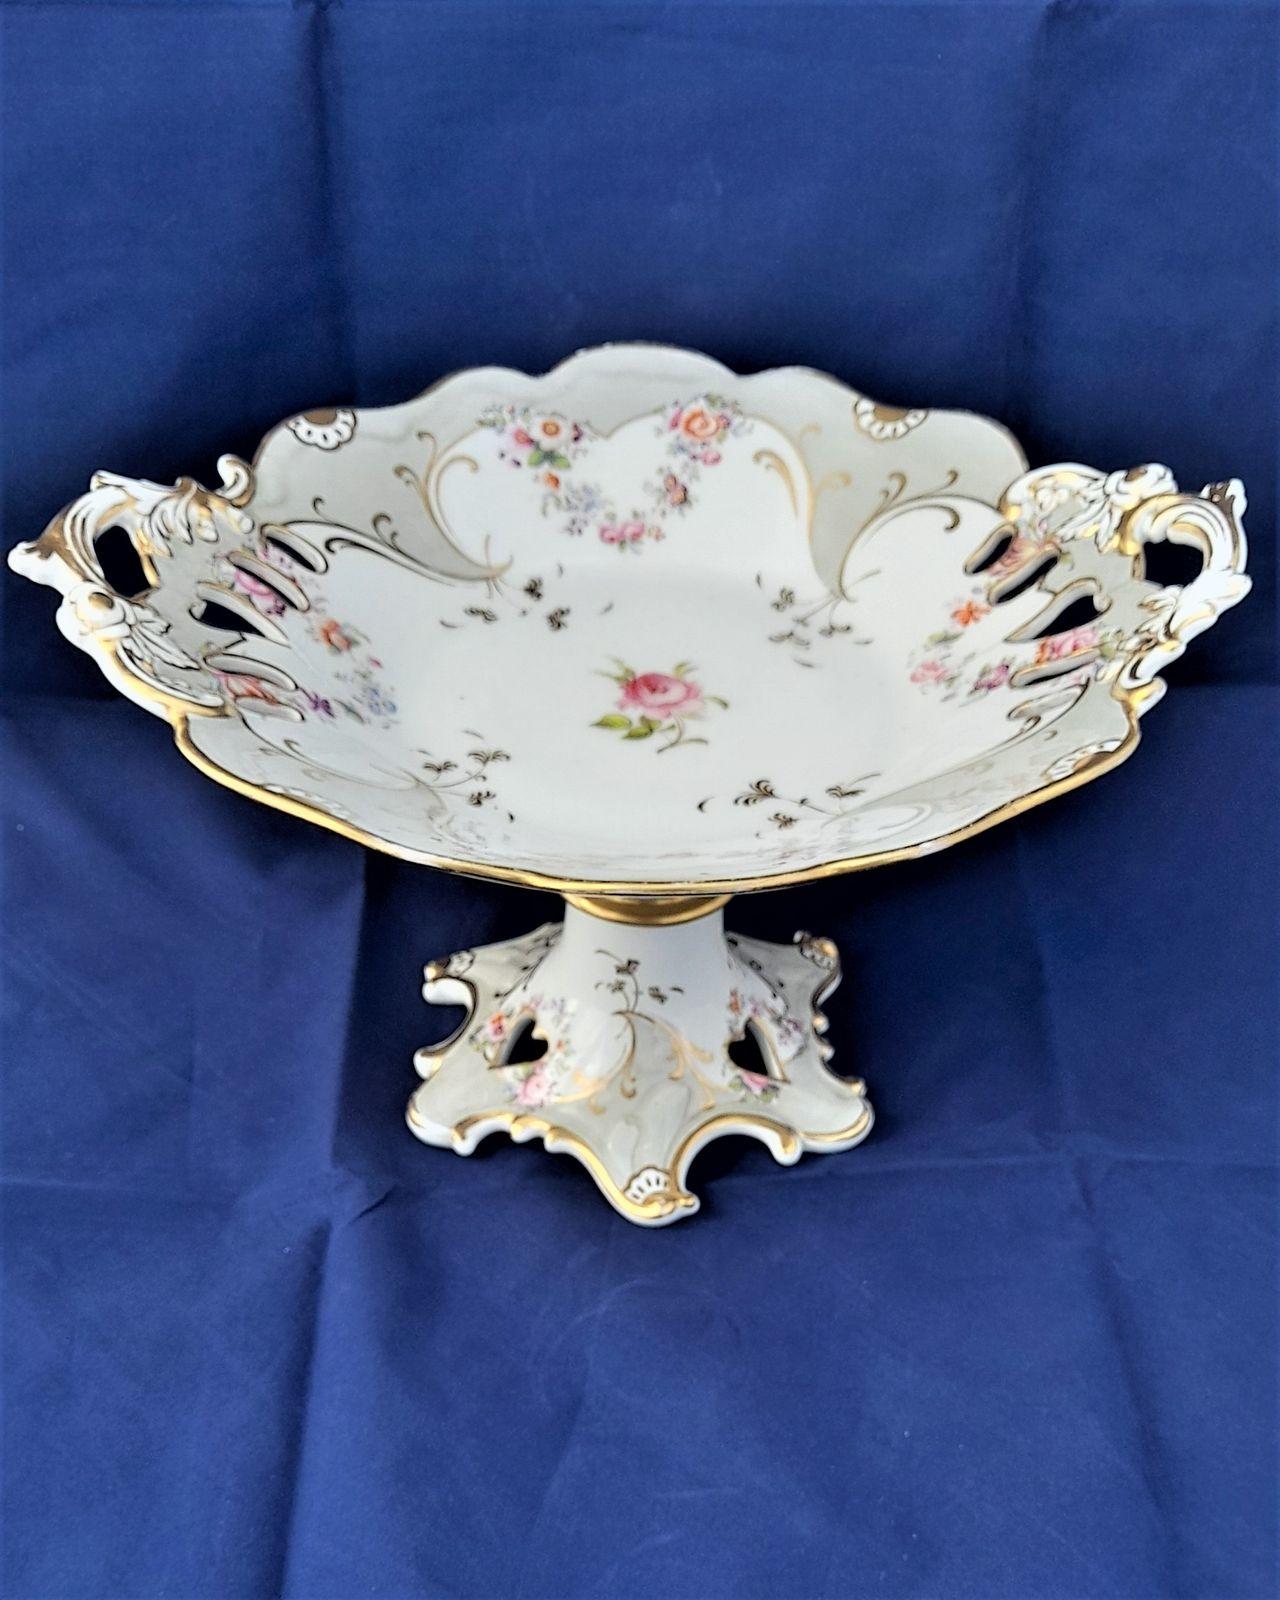 an antique large John Ridgway and Co porcelain comport shaped and pierced in a rococo revival style printed and hand painted in pattern number 5836 circa 1840